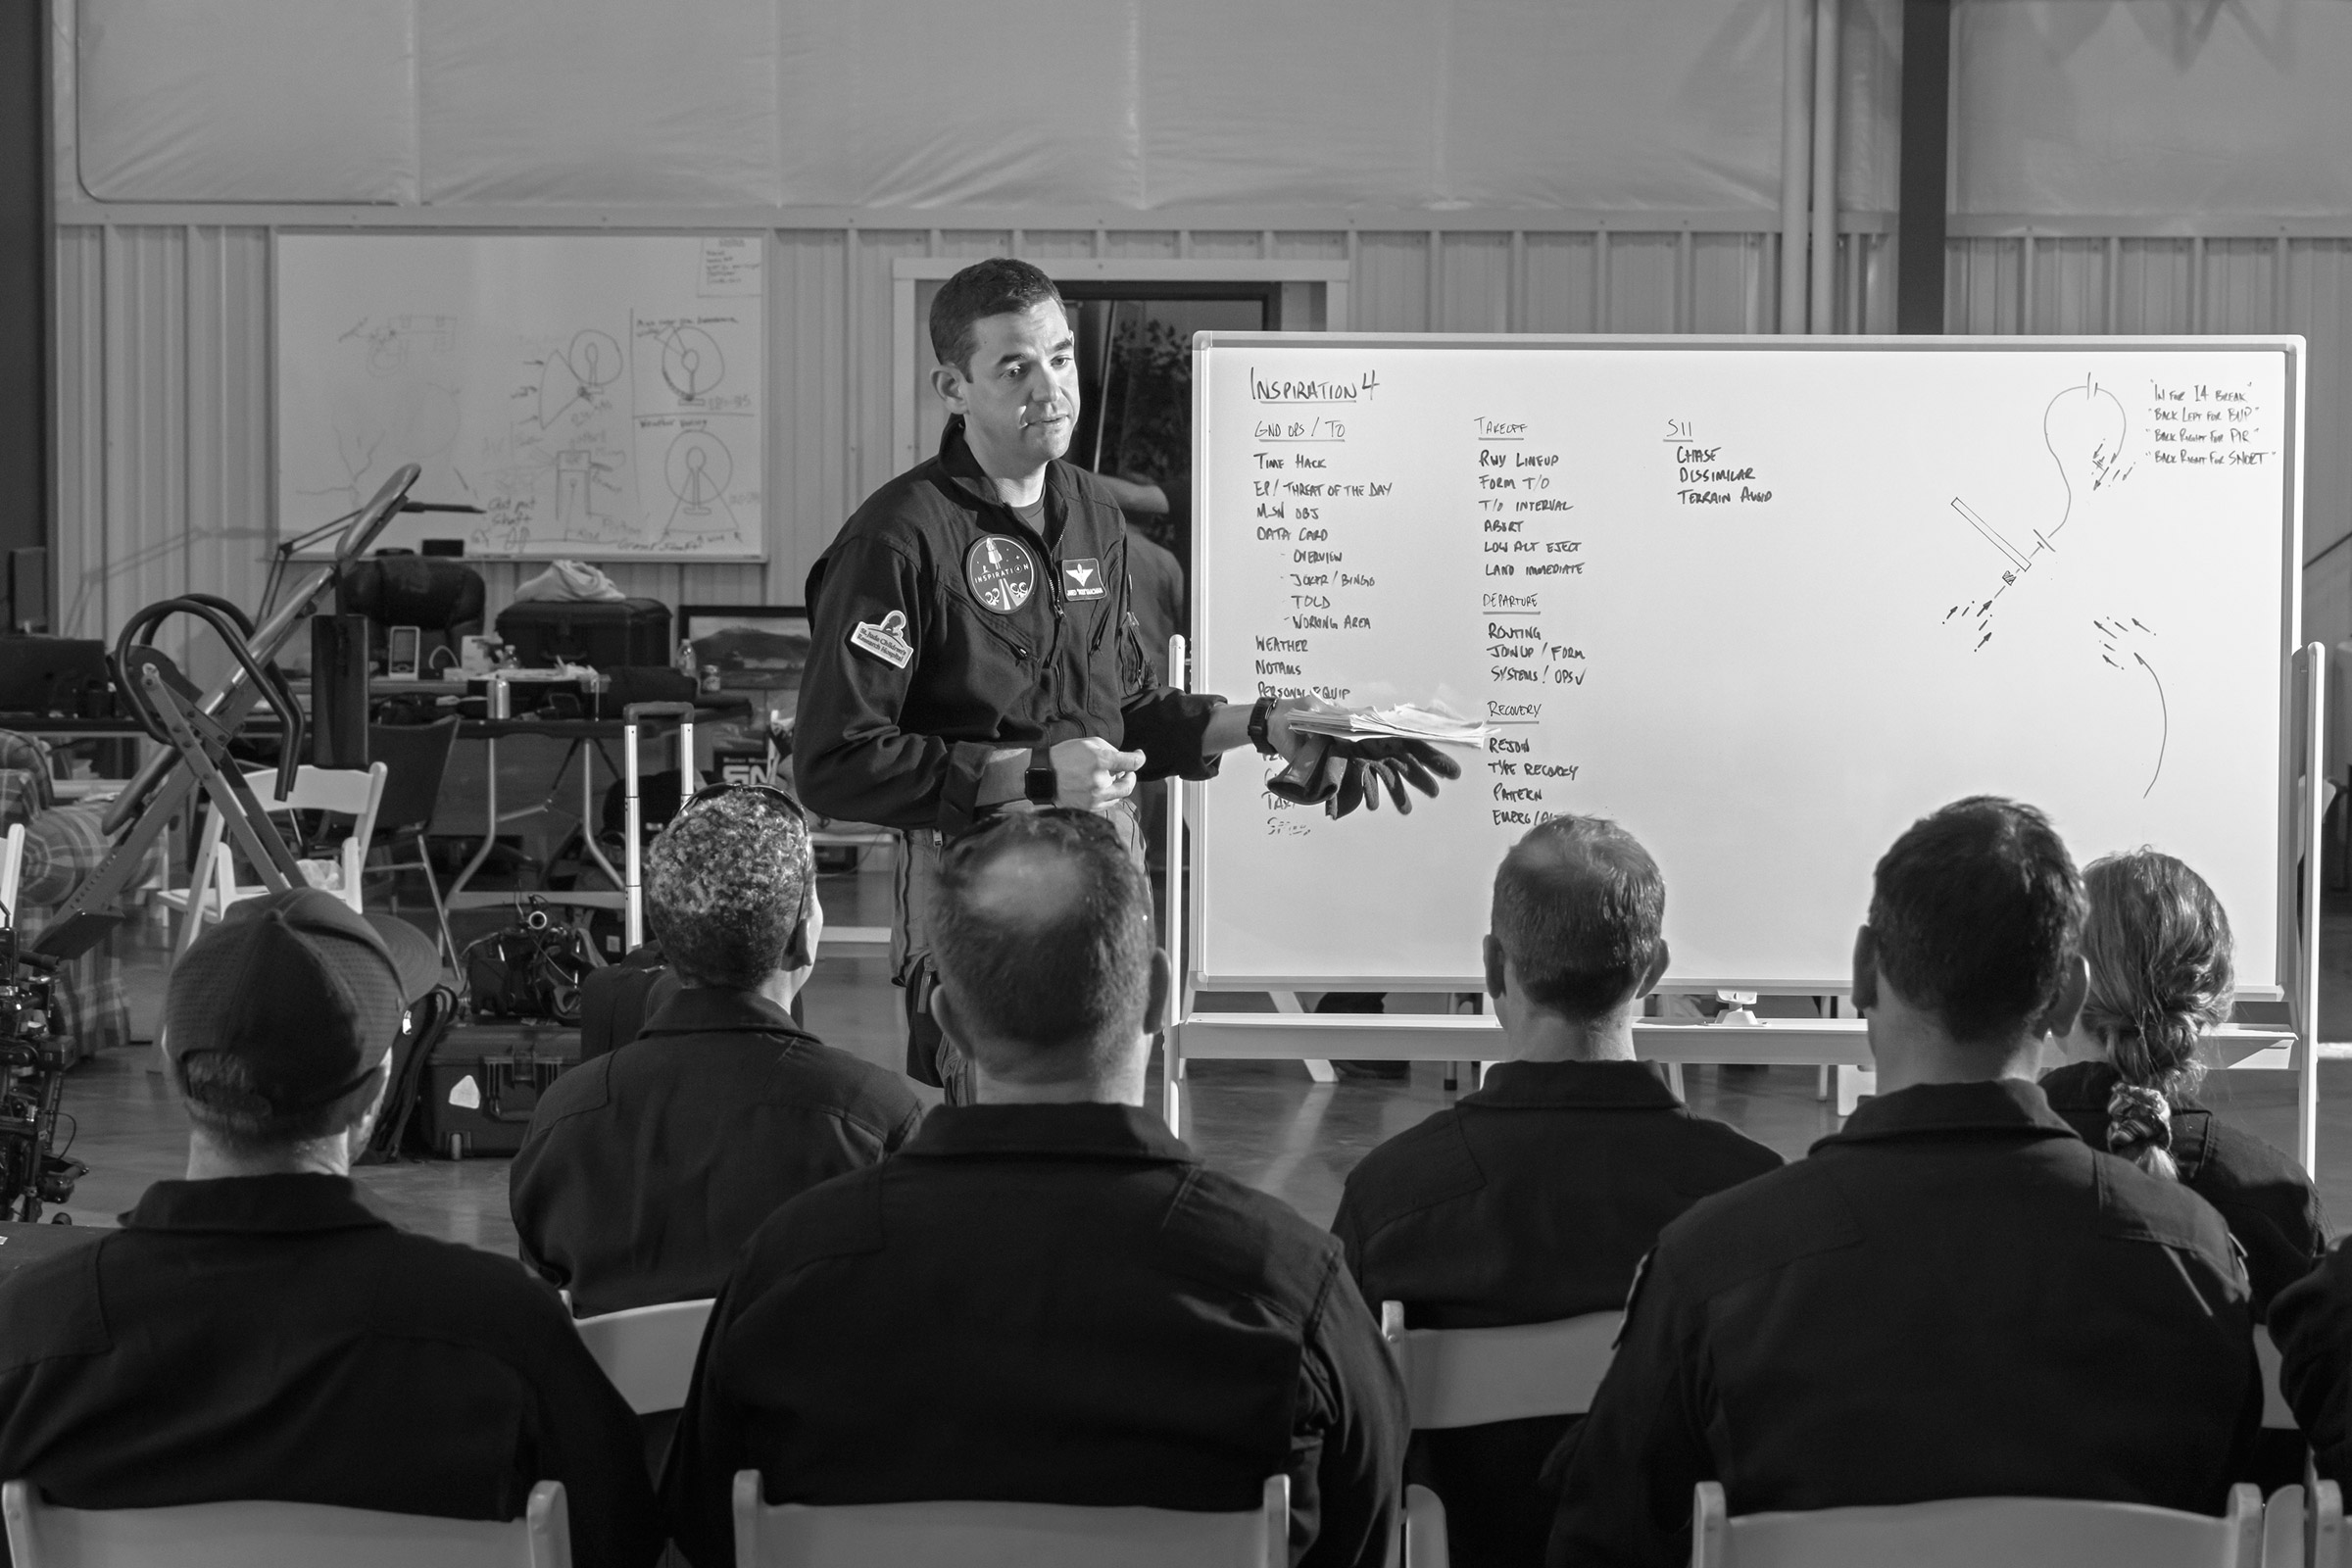 Jared Isaacman briefs the Inspiration4 crew before a training session in Belgrade, Mont., on Aug. 7, 2021. (Philip Montgomery for TIME)